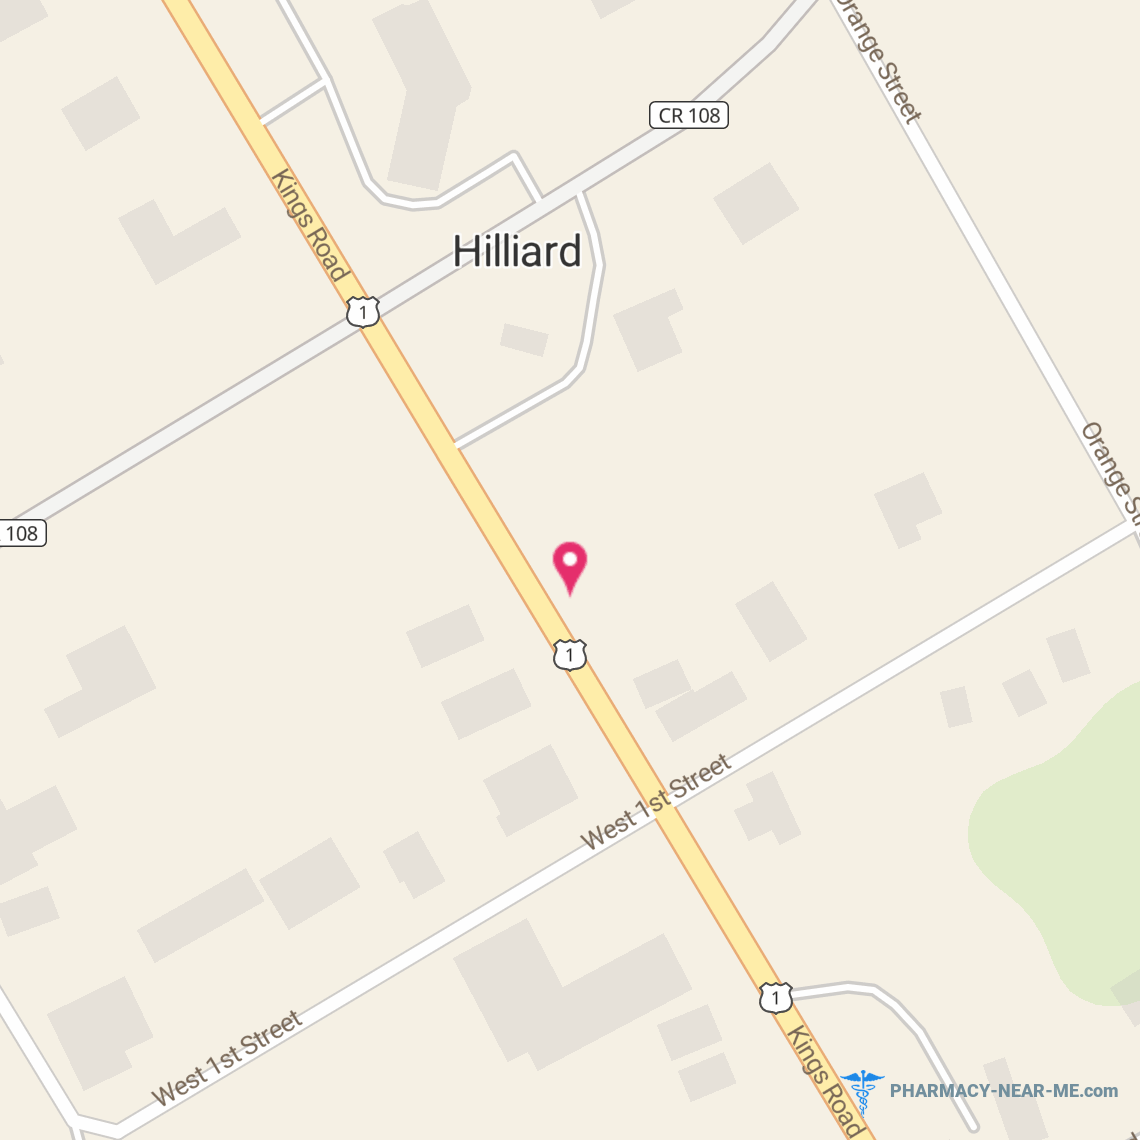 HILLIARD PHARMACY INC - Pharmacy Hours, Phone, Reviews & Information: 551770 US Highway 1, Hilliard, Florida 32046, United States